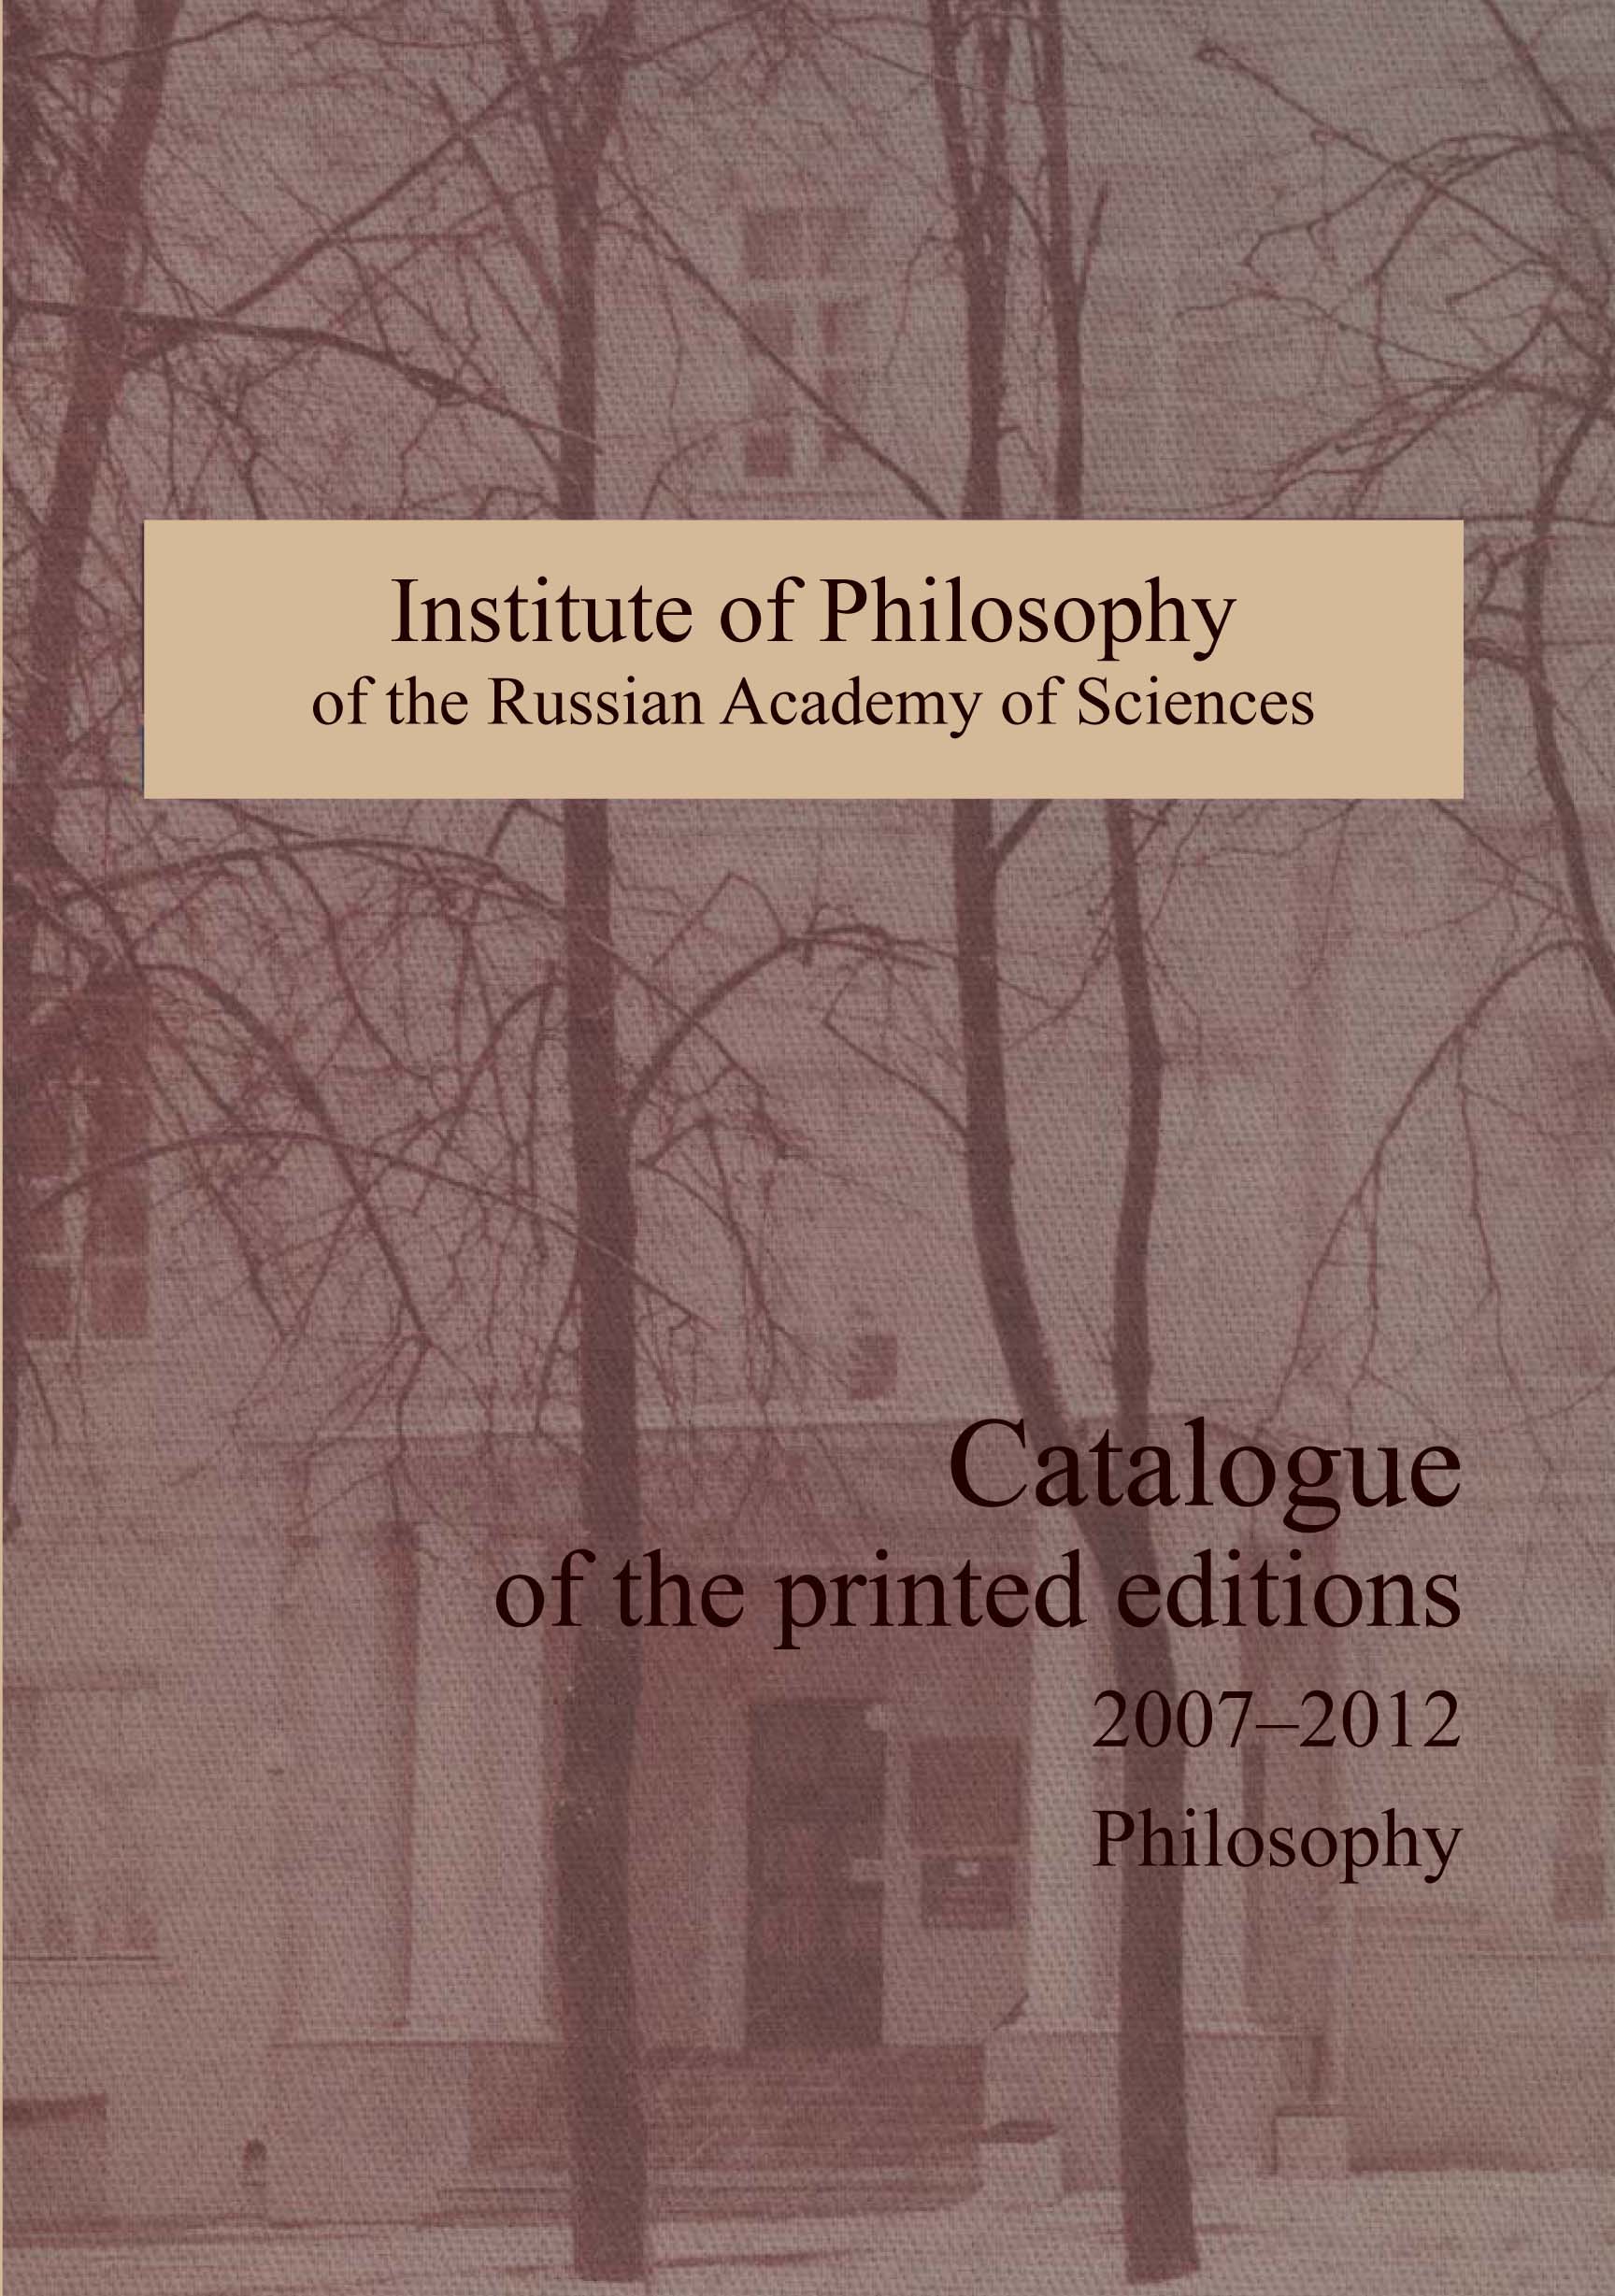 Catalogue of the editions published by the Institute of Philosophy of the Russian Academy of Sciences